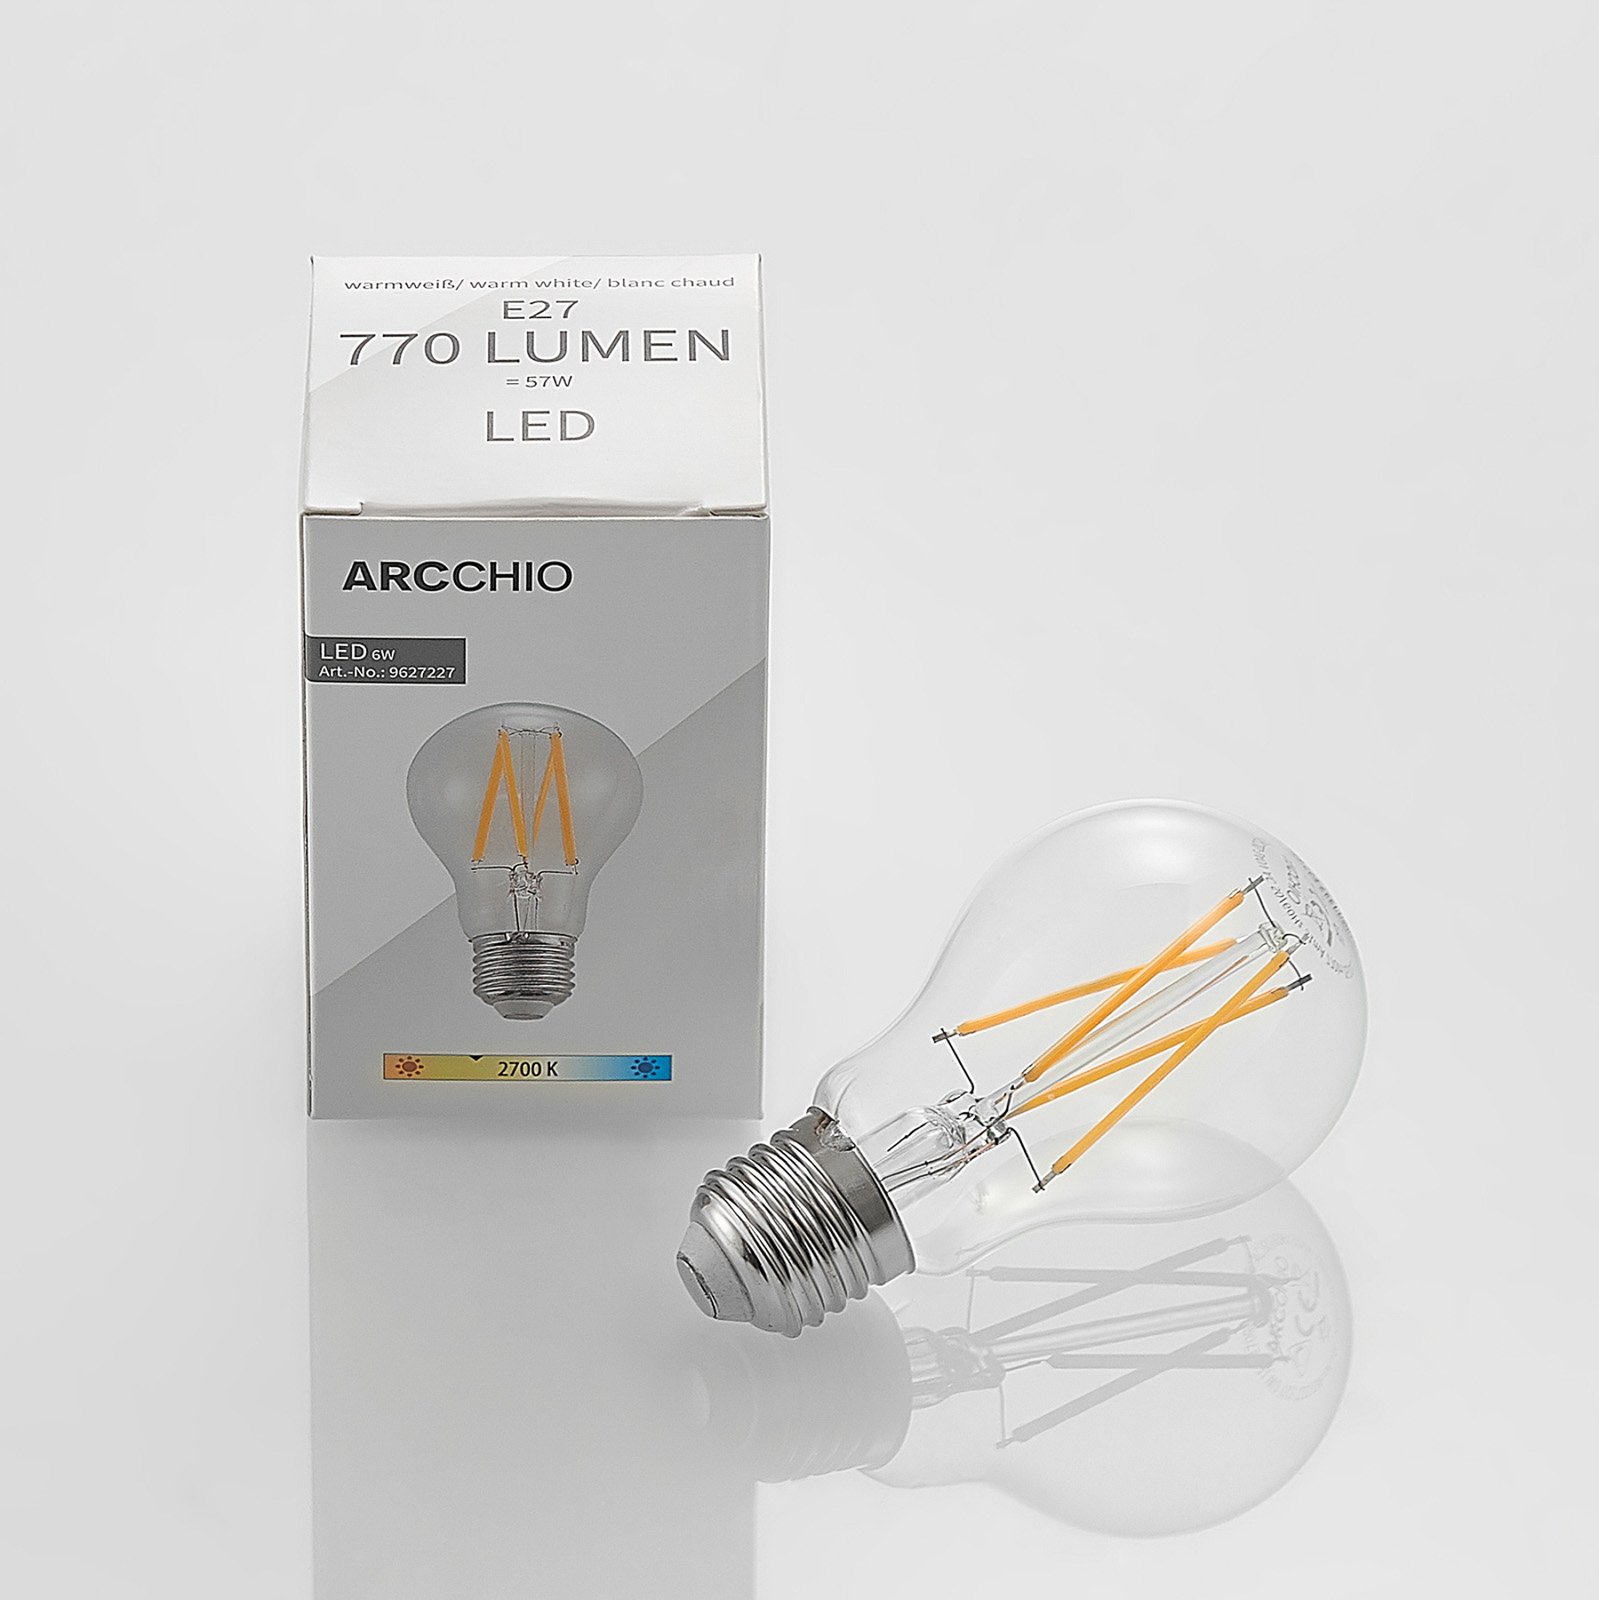 LED bulb E27 6W 2,700K filament, dimmable clear 3x